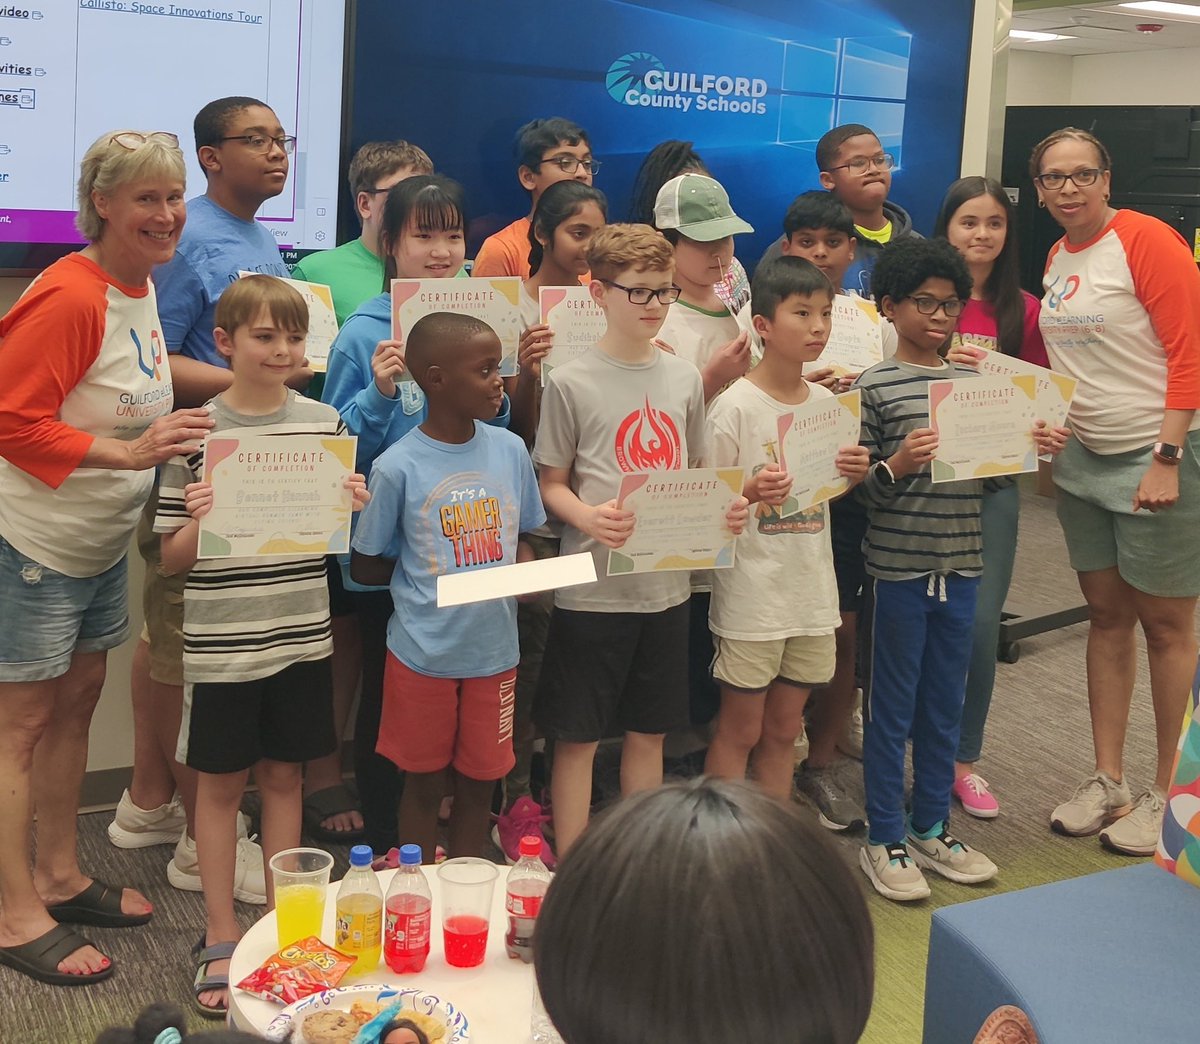 It’s virtually impossible to stop students from learning. @GCSchoolsNC offered a virtual summer camp led by @GUniversityPrep CTE teachers. Students explored business & computer technology. They met face to face to celebrate their hard work. #LearningNeverStops @CTEforNC